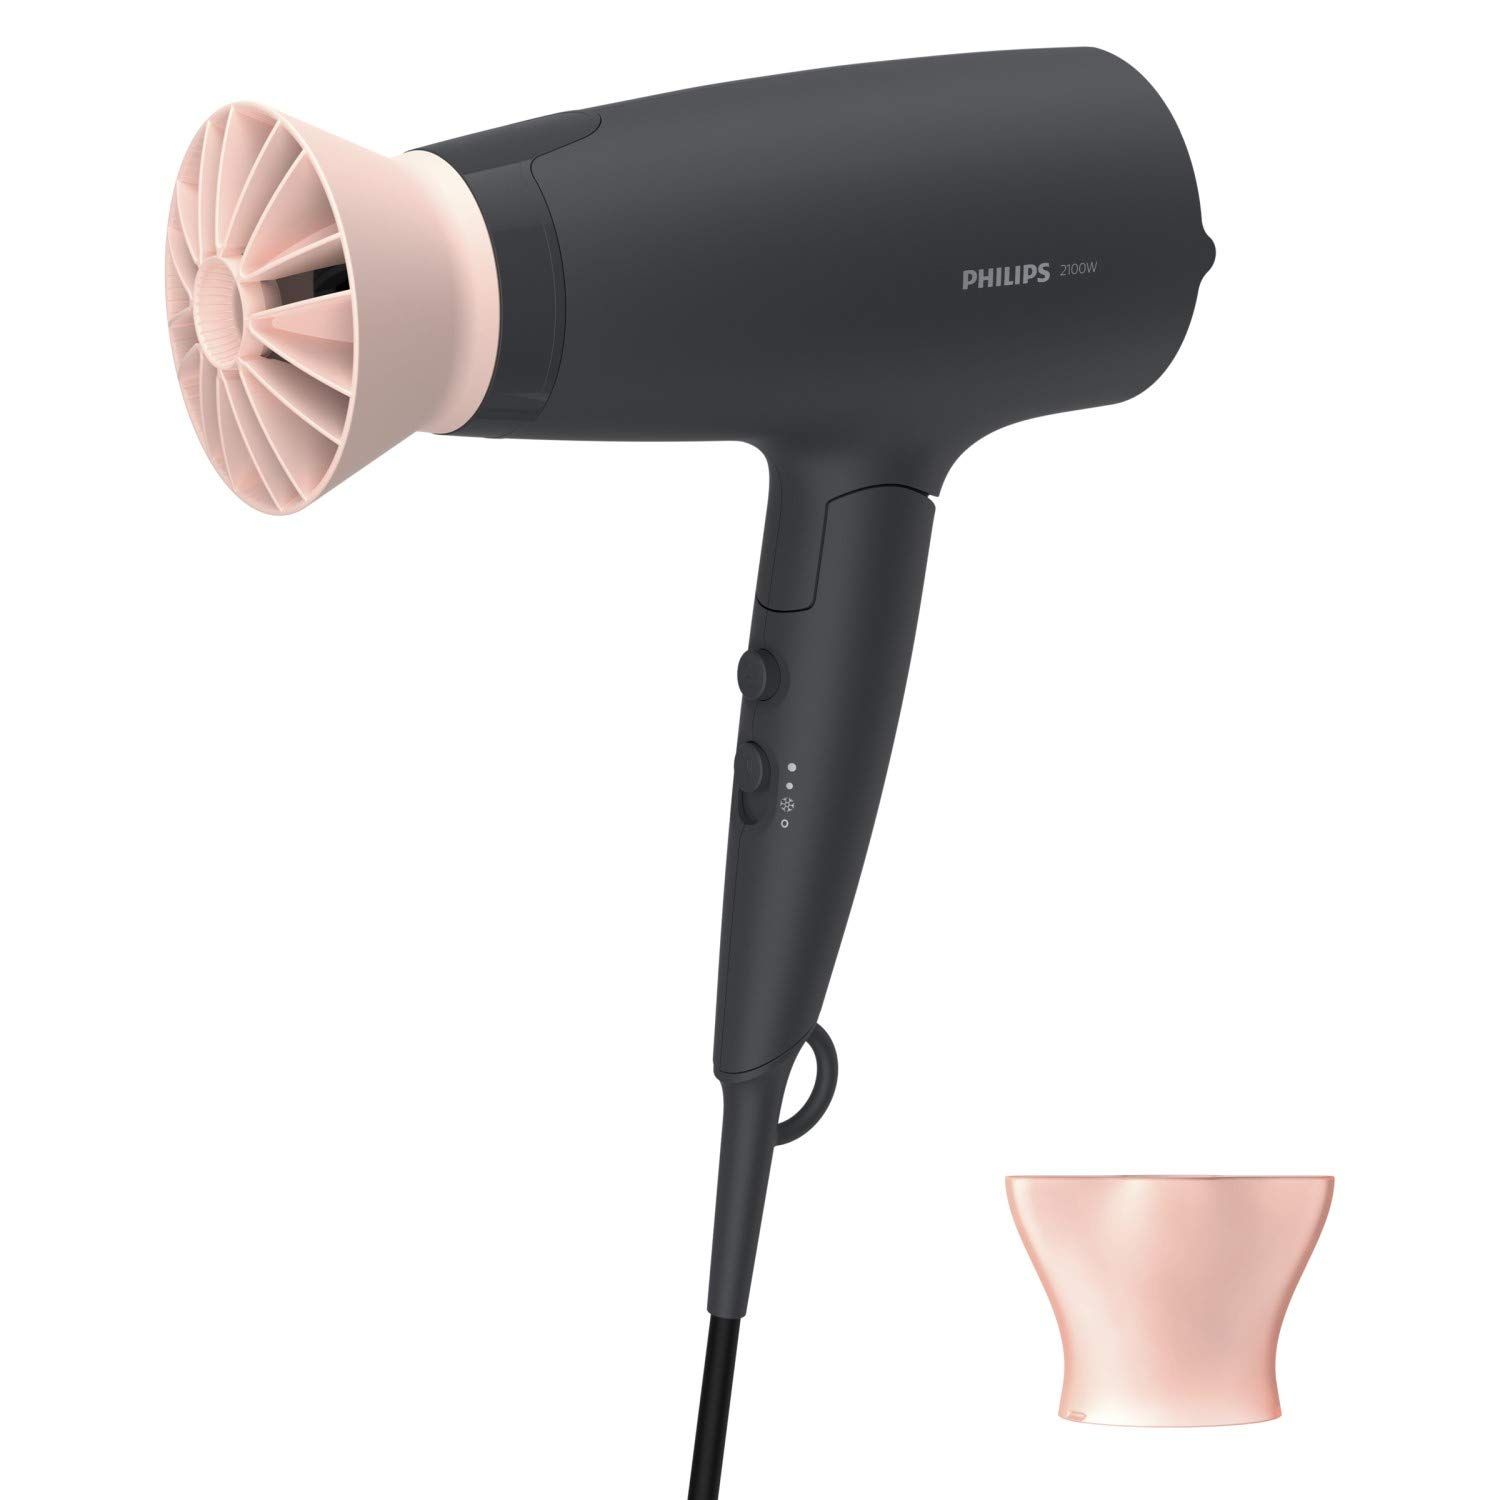 How To Use A Hair Dryer At Home 2022 (Complete Guide)